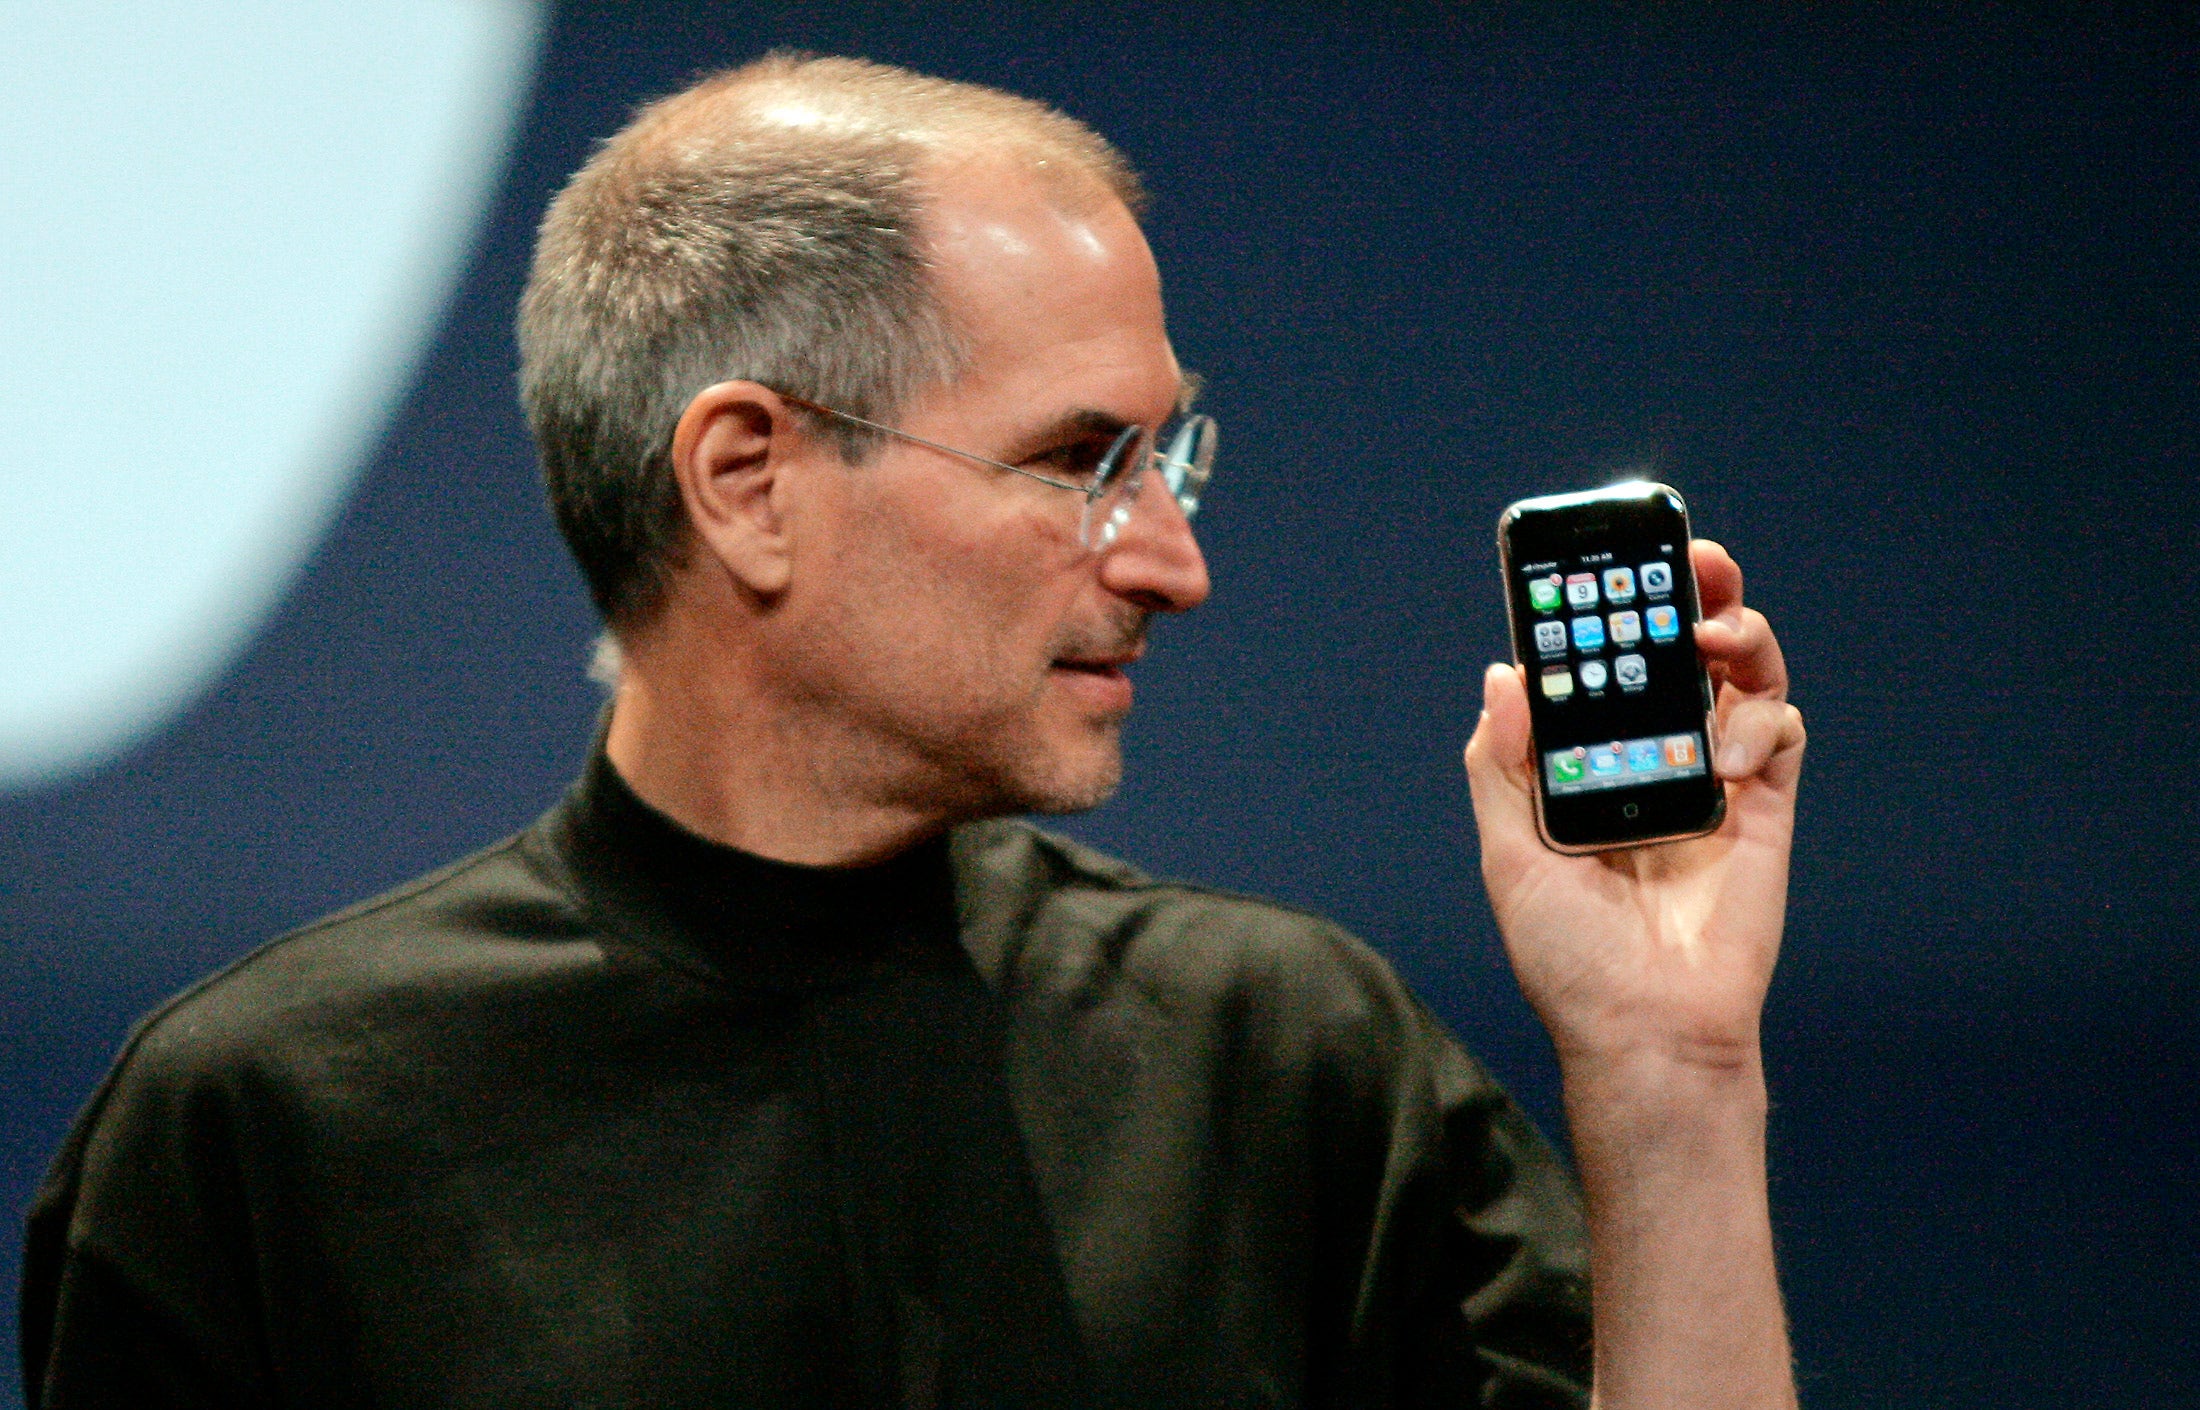 Apple Computer Inc. Chief Executive Officer Steve Jobs holds the new iPhone in San Francisco, California January 9, 2007. Apple unveiled an eagerly-anticipated iPod mobile phone with a touch-screen on Tuesday, priced at $599 for 8 gigabytes of memory, pushing the company's shares up as much as 8.5 percent. Jobs said the iPhone, which also will be available in a 4-gigabyte model for $499, will ship in June in the United States. The phones will be available in Europe in the fourth quarter and in Asia in 2008. REUTERS/Kimberly White (UNITED STATES) FOR BEST QUALITY IMAGE SEE: GM1E7AE0B8F01 - RTR1L0YV